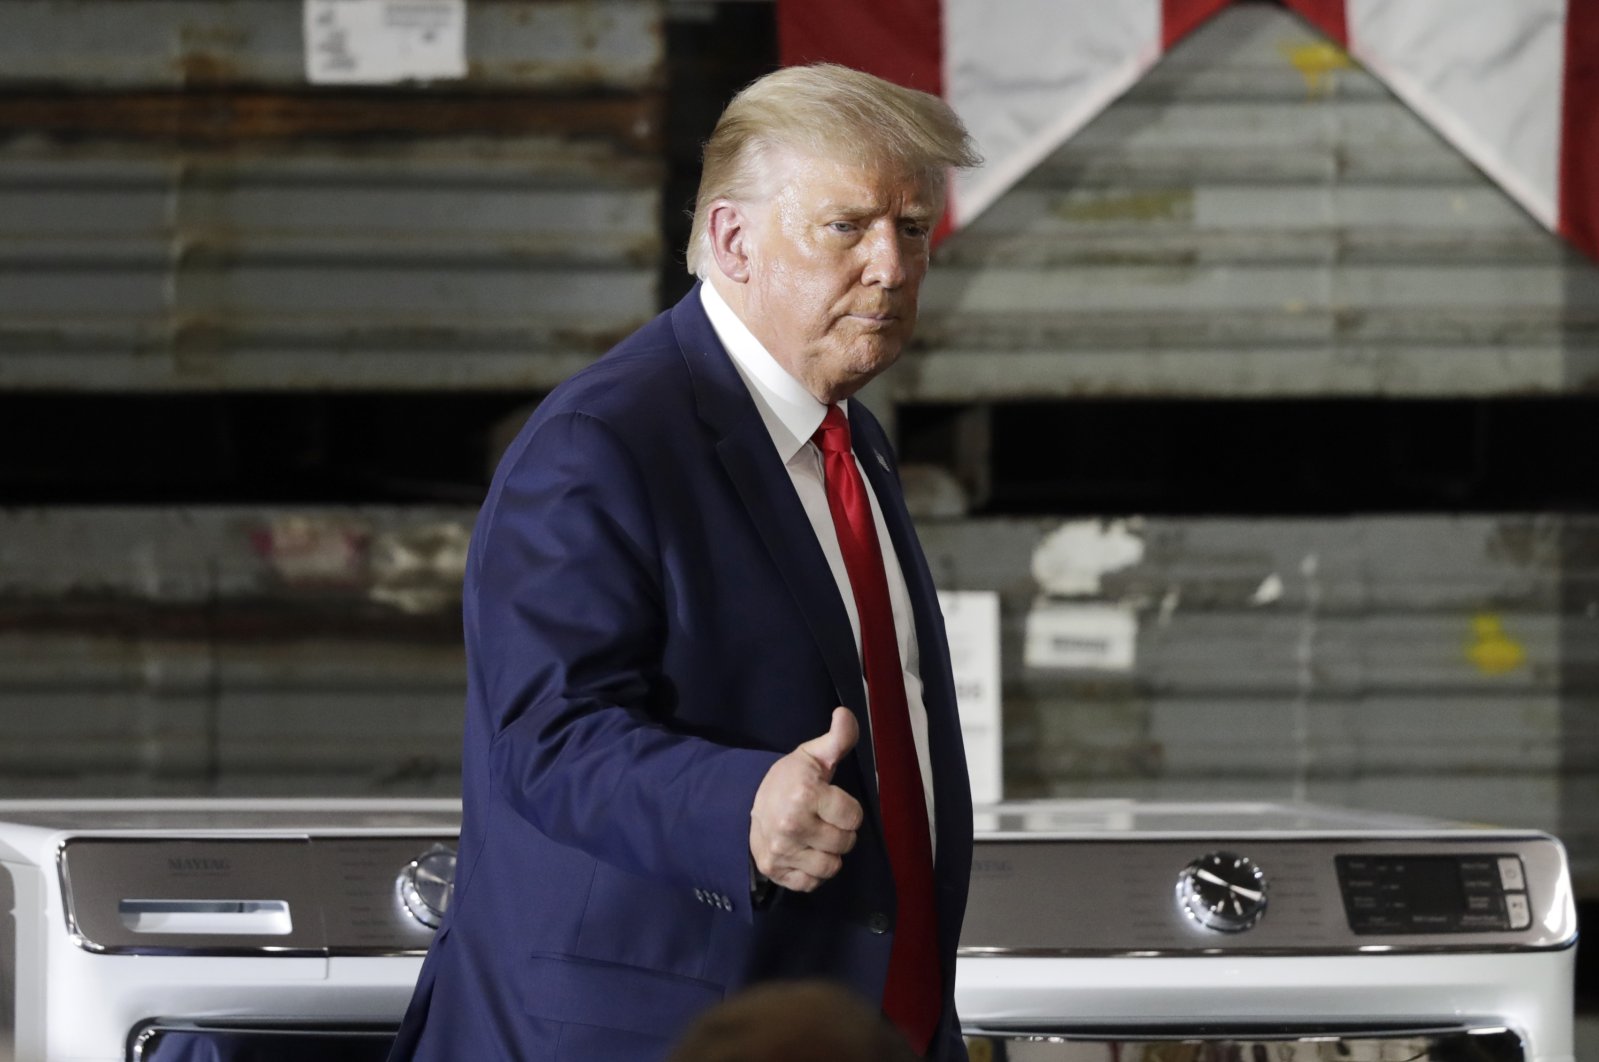 President Donald Trump gives a thumbs up after speaking during an event at the Whirlpool Corporation Manufacturing Plant, Aug. 6, 2020, in Clyde, Ohio. (AP Photo)